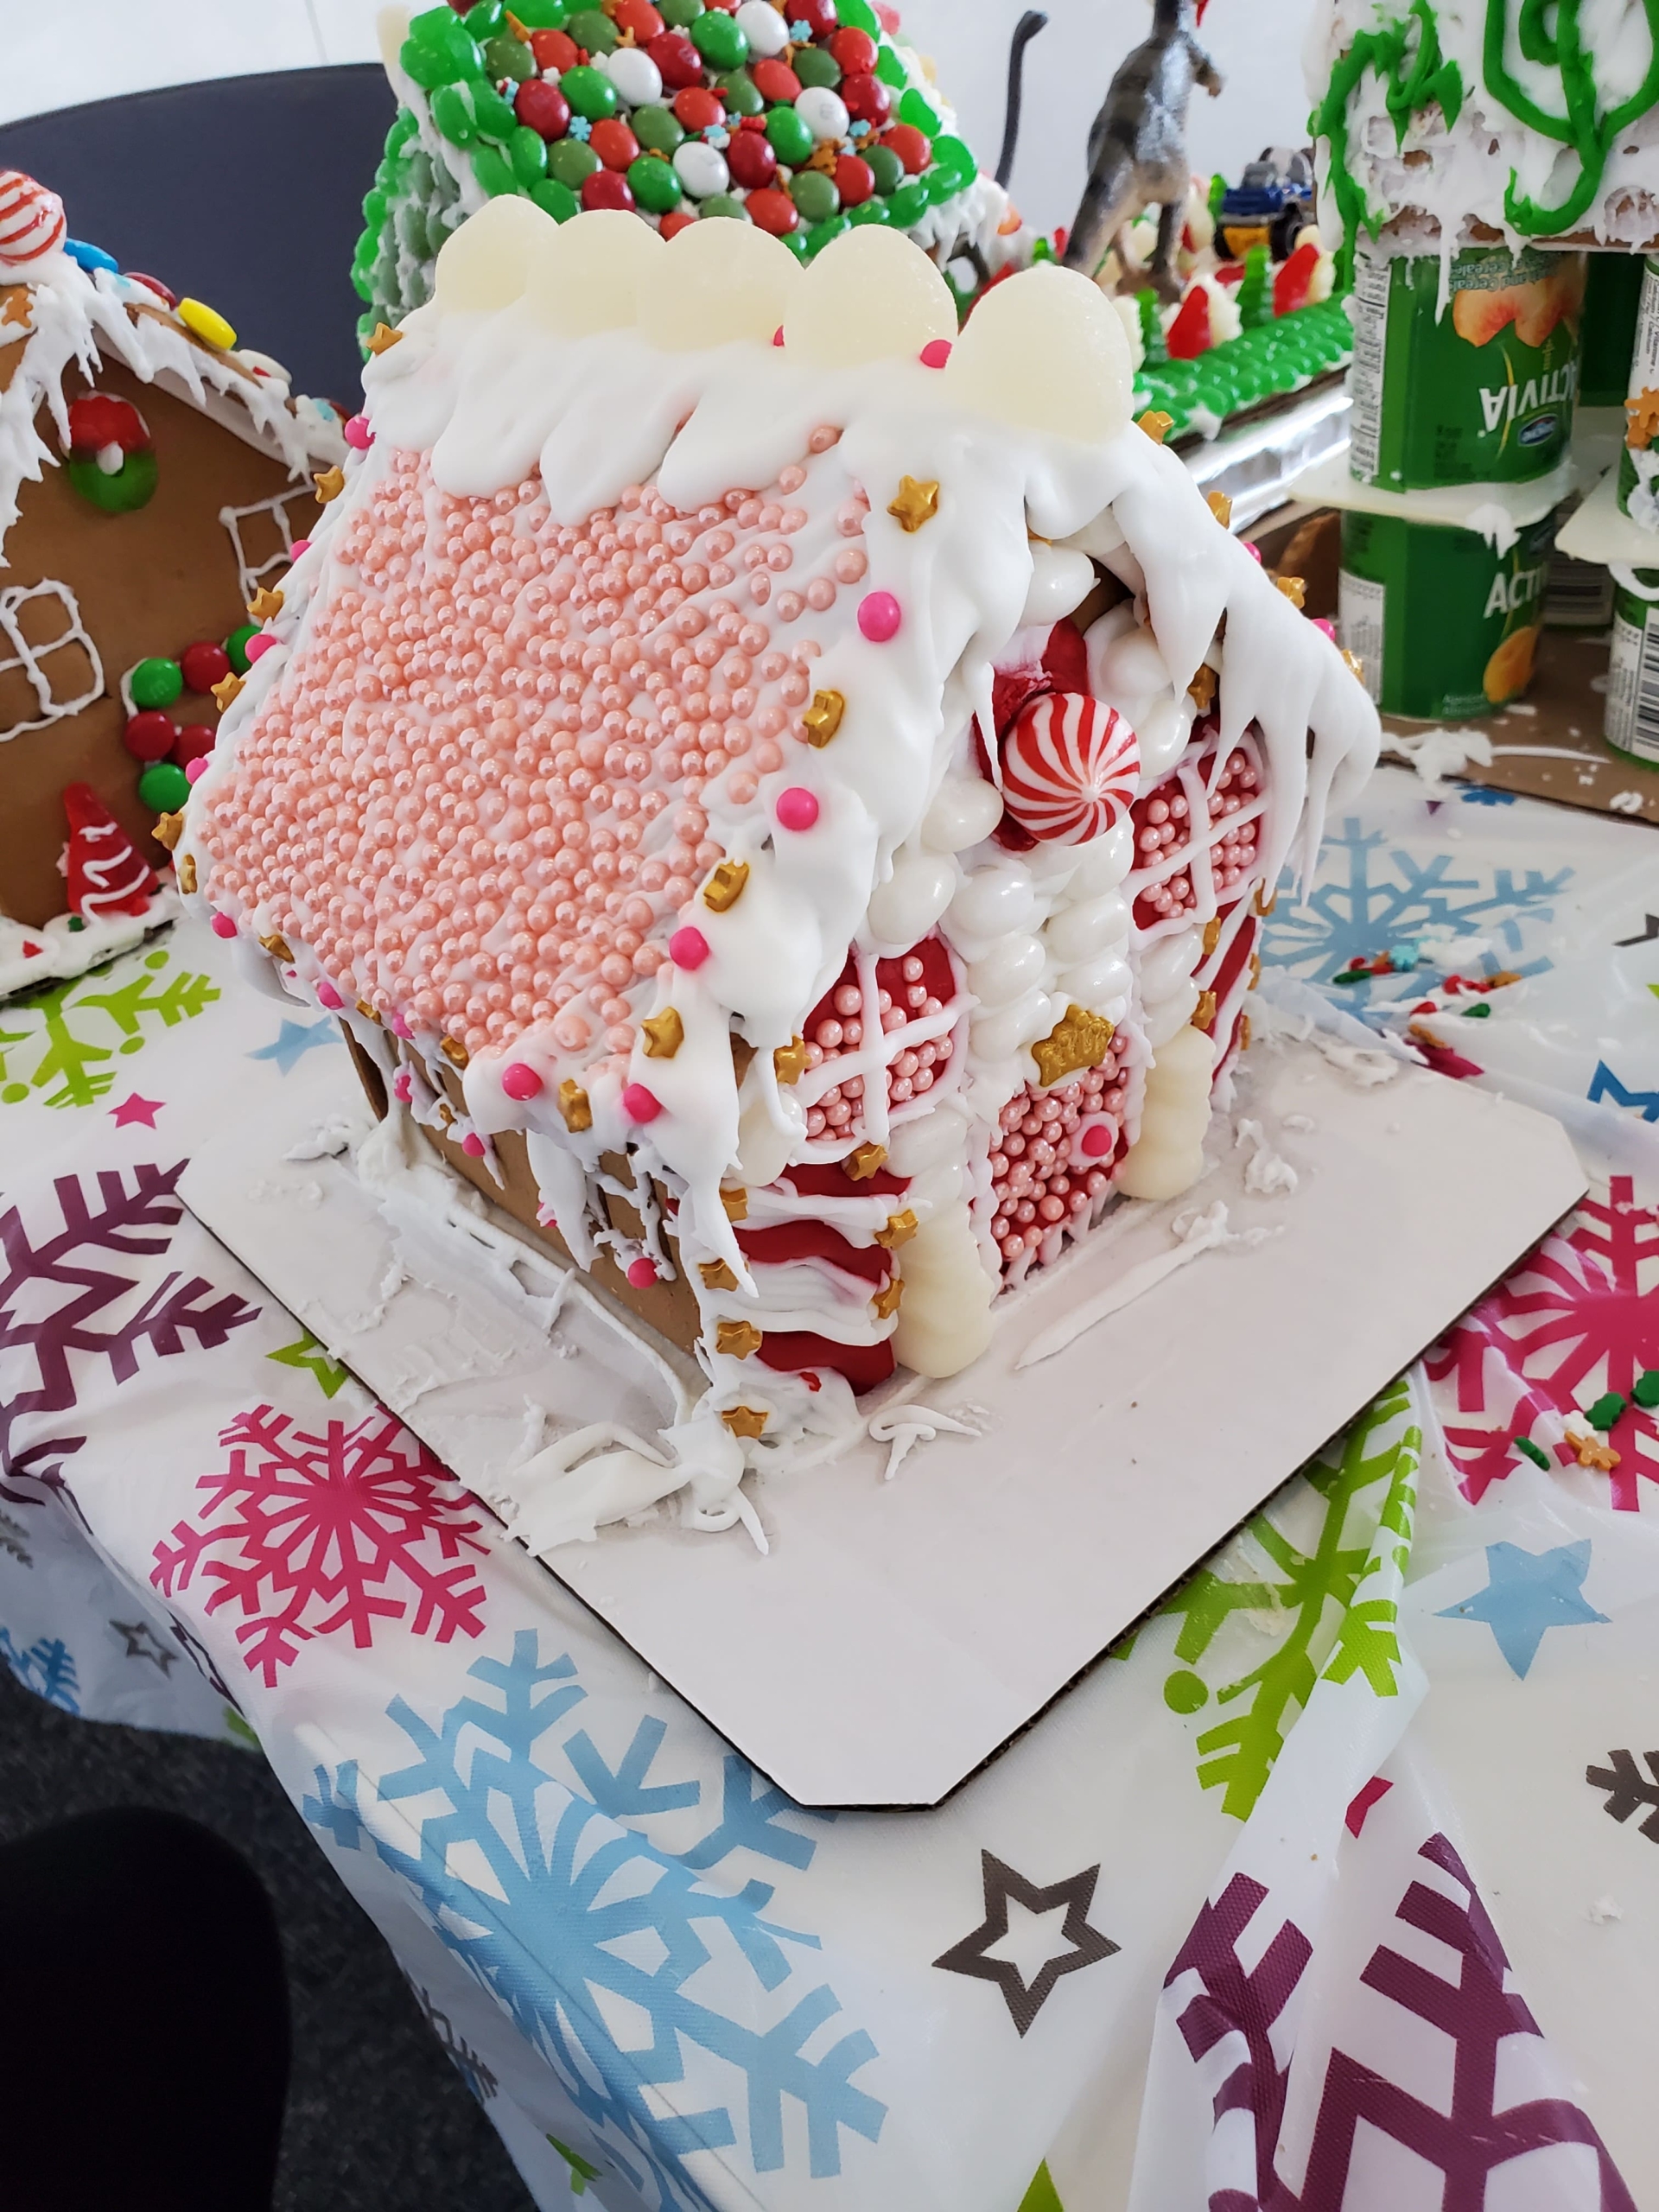 Ditlev Lab gingerbread house. The roof is covered in white icing.